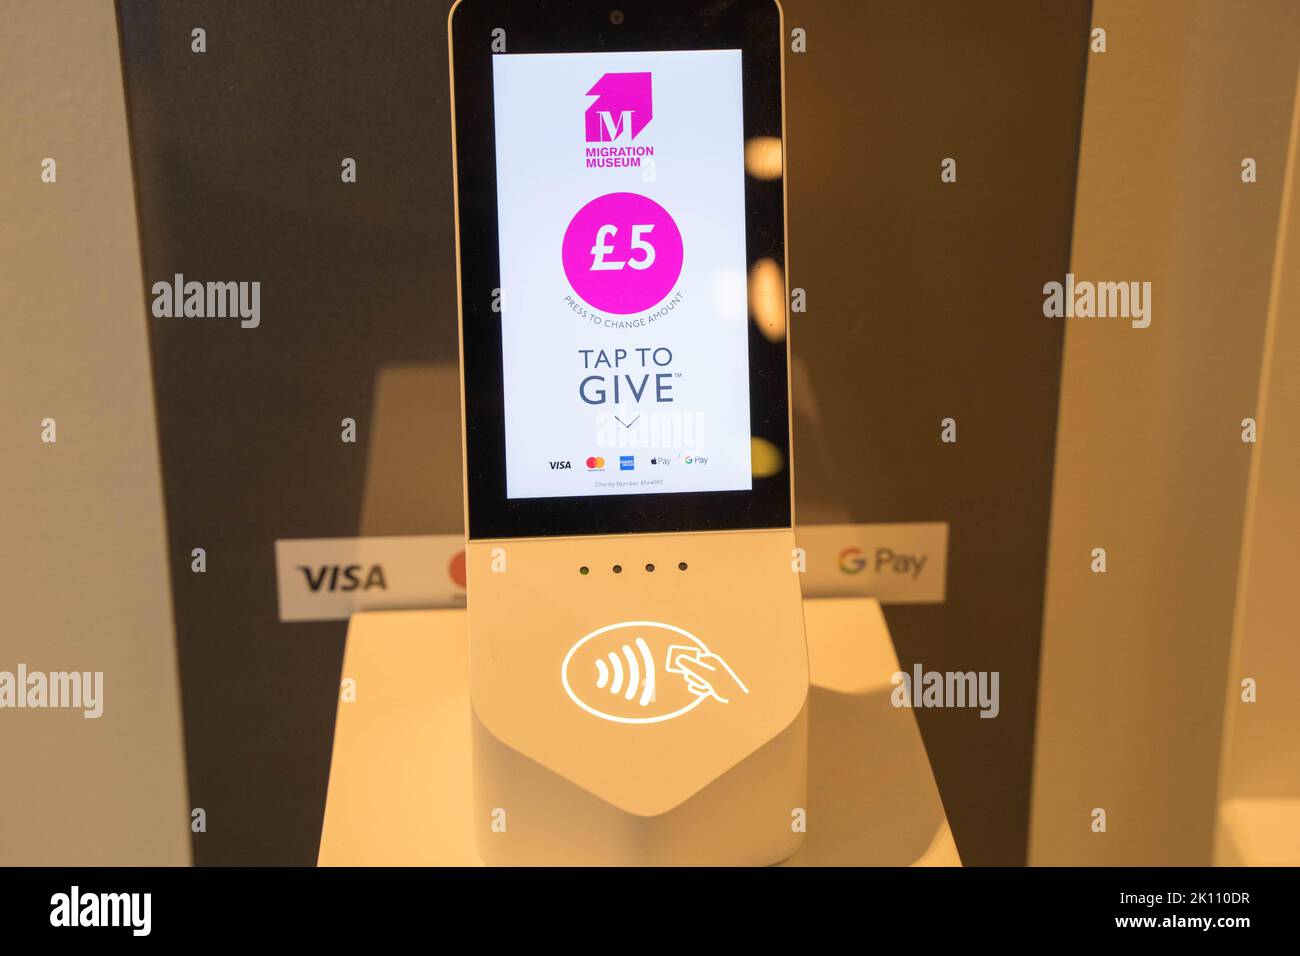 contactless payment terminal accepting donations from visitors to migration museum in Lewisham UK Stock Photo